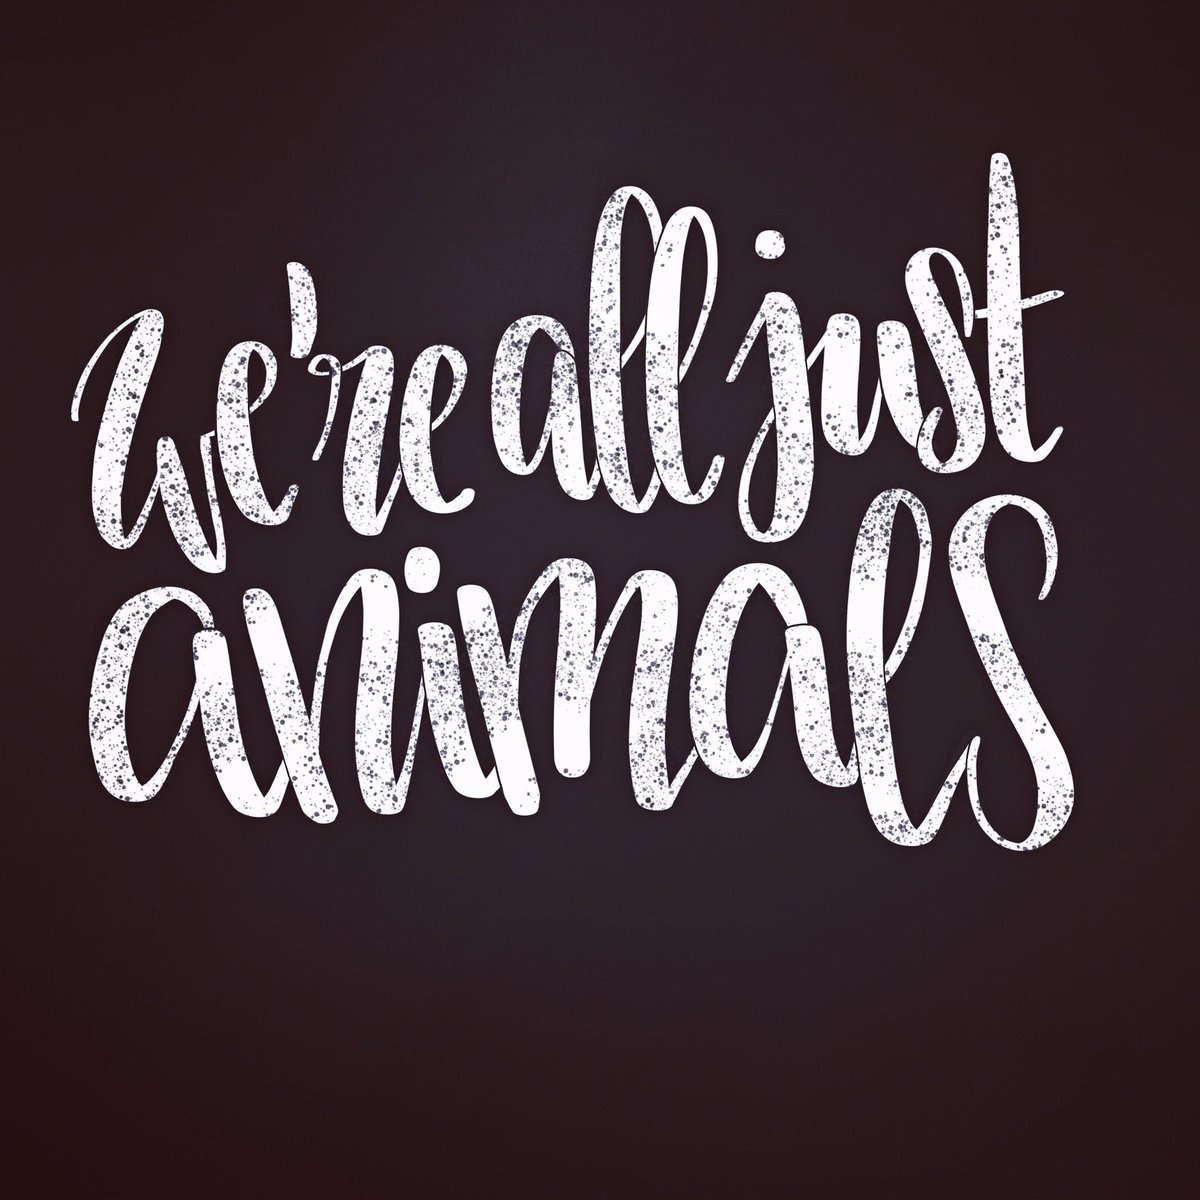 We're all animals